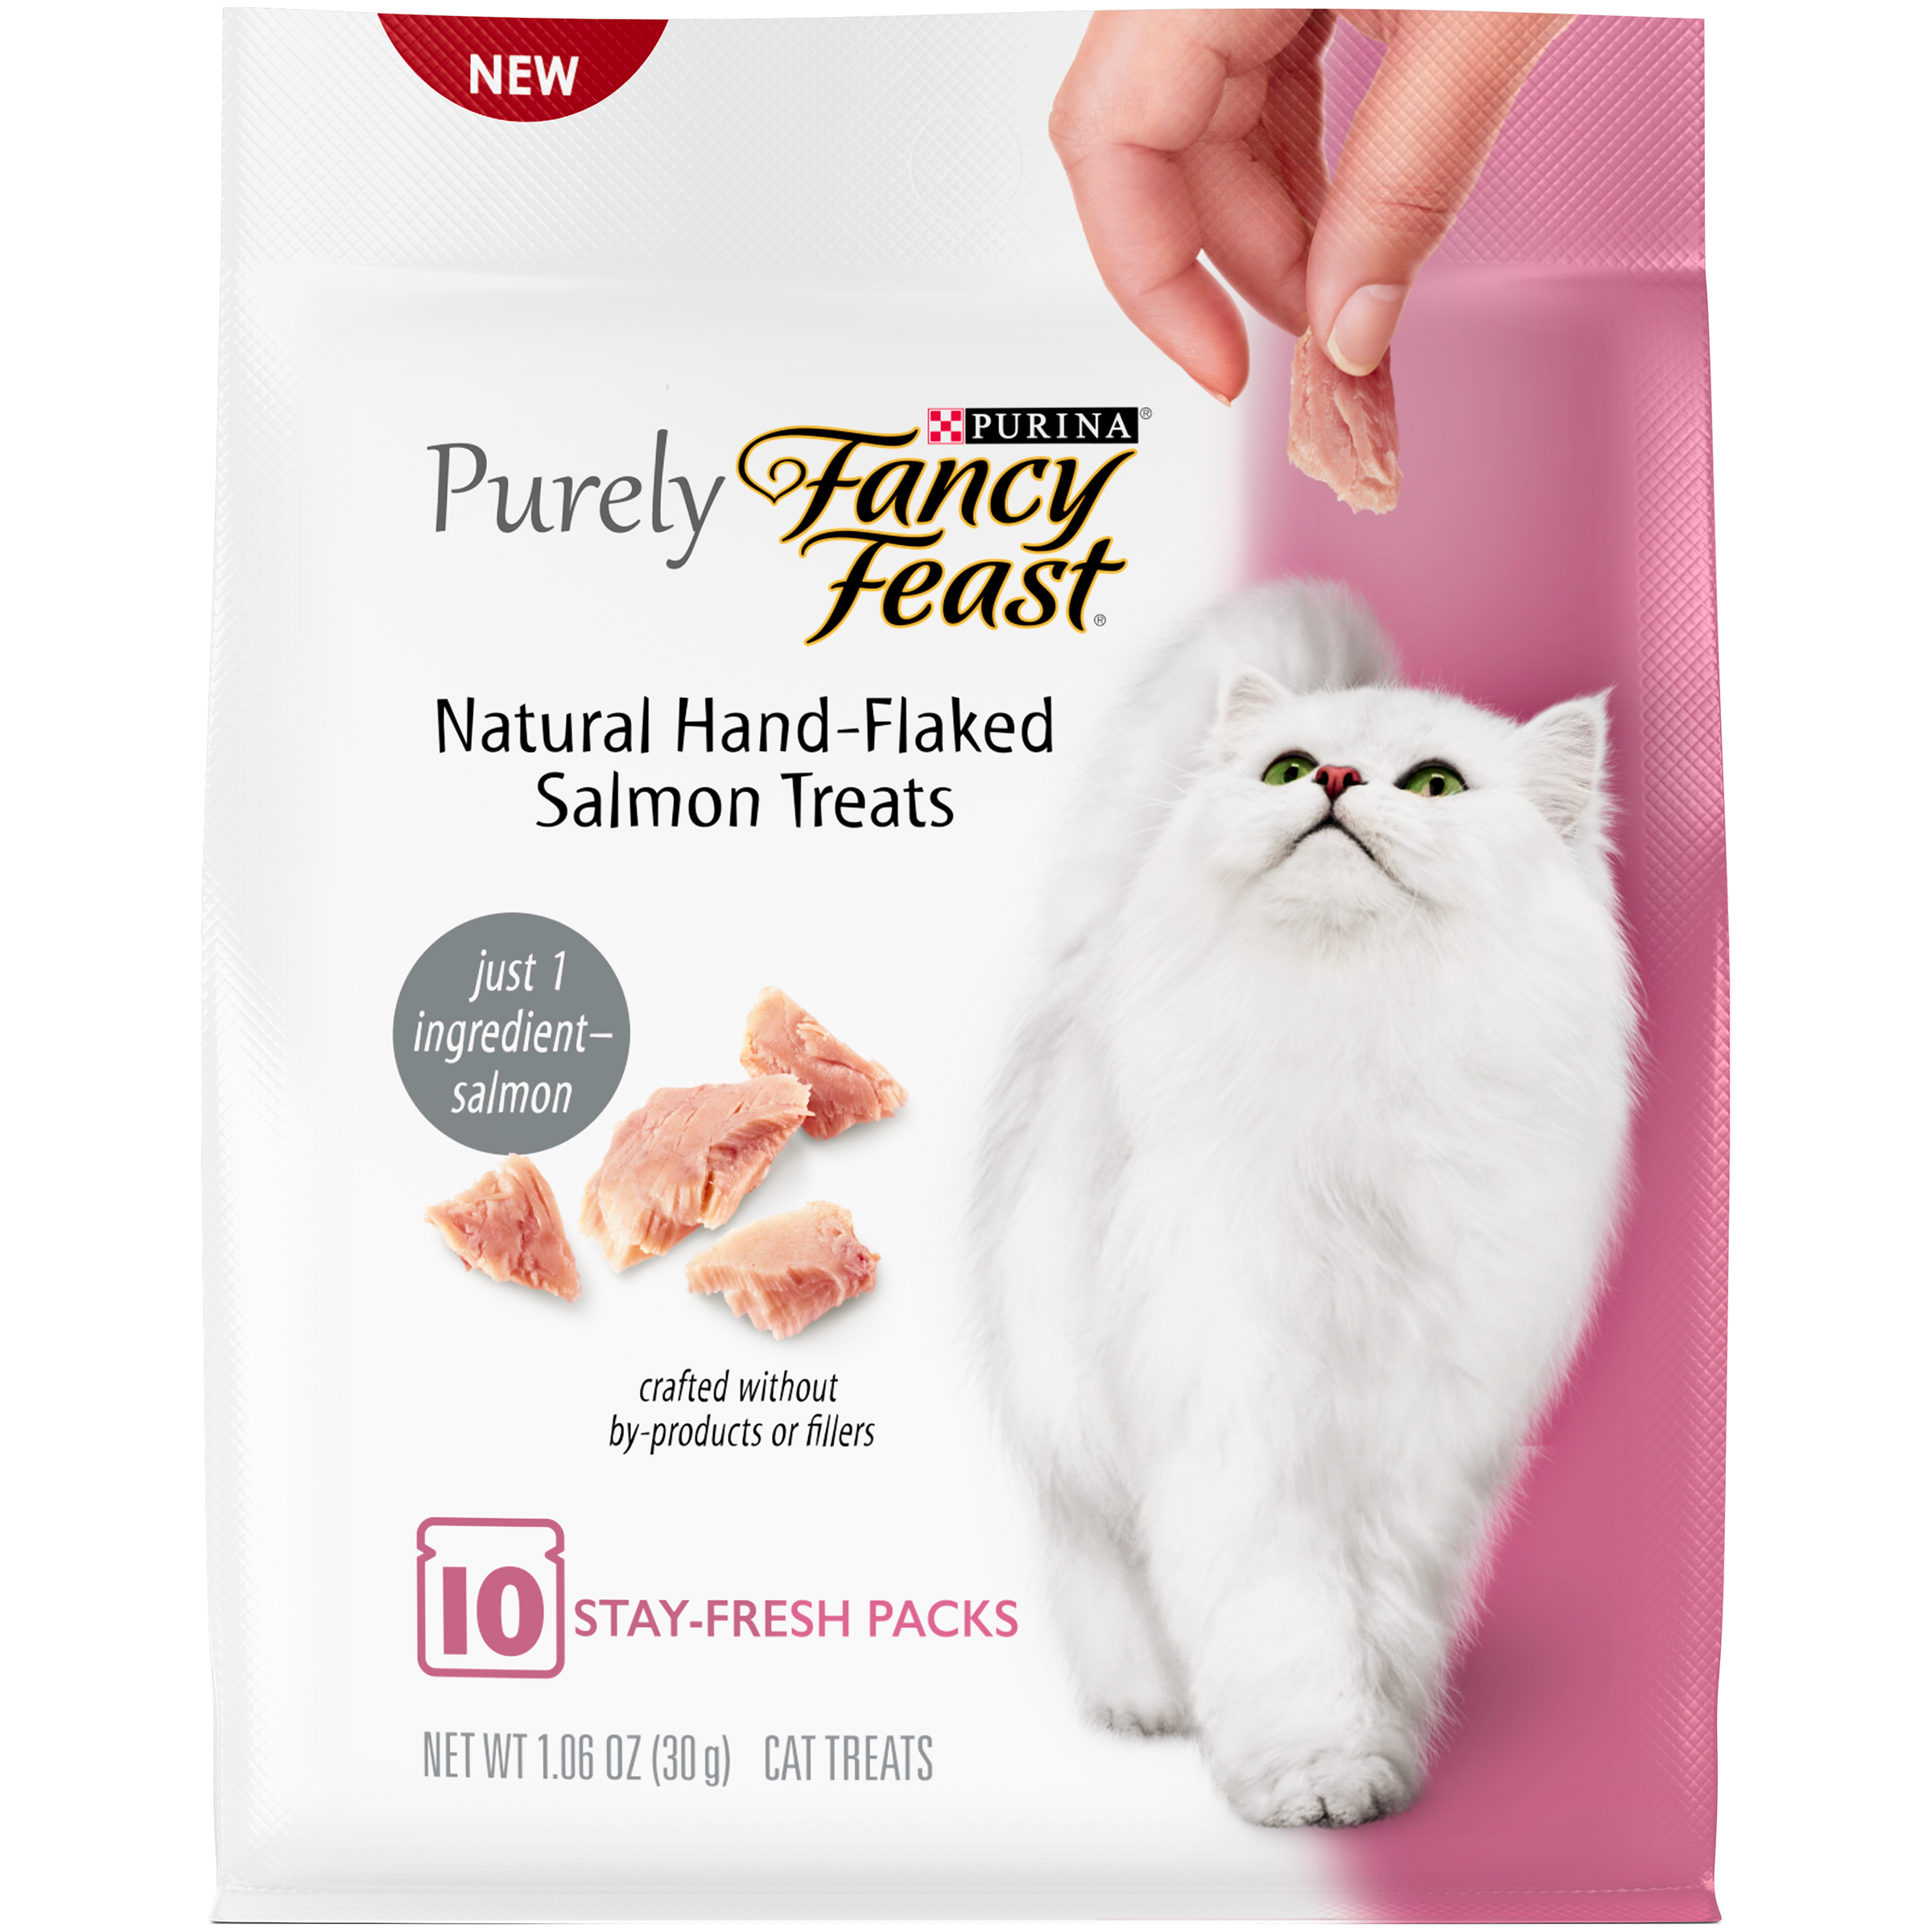 0050000963461 - PURELY NATURAL HAND-FLAKED SALMON CAT TREATS 10 - 1.06 OZ. POUCHES